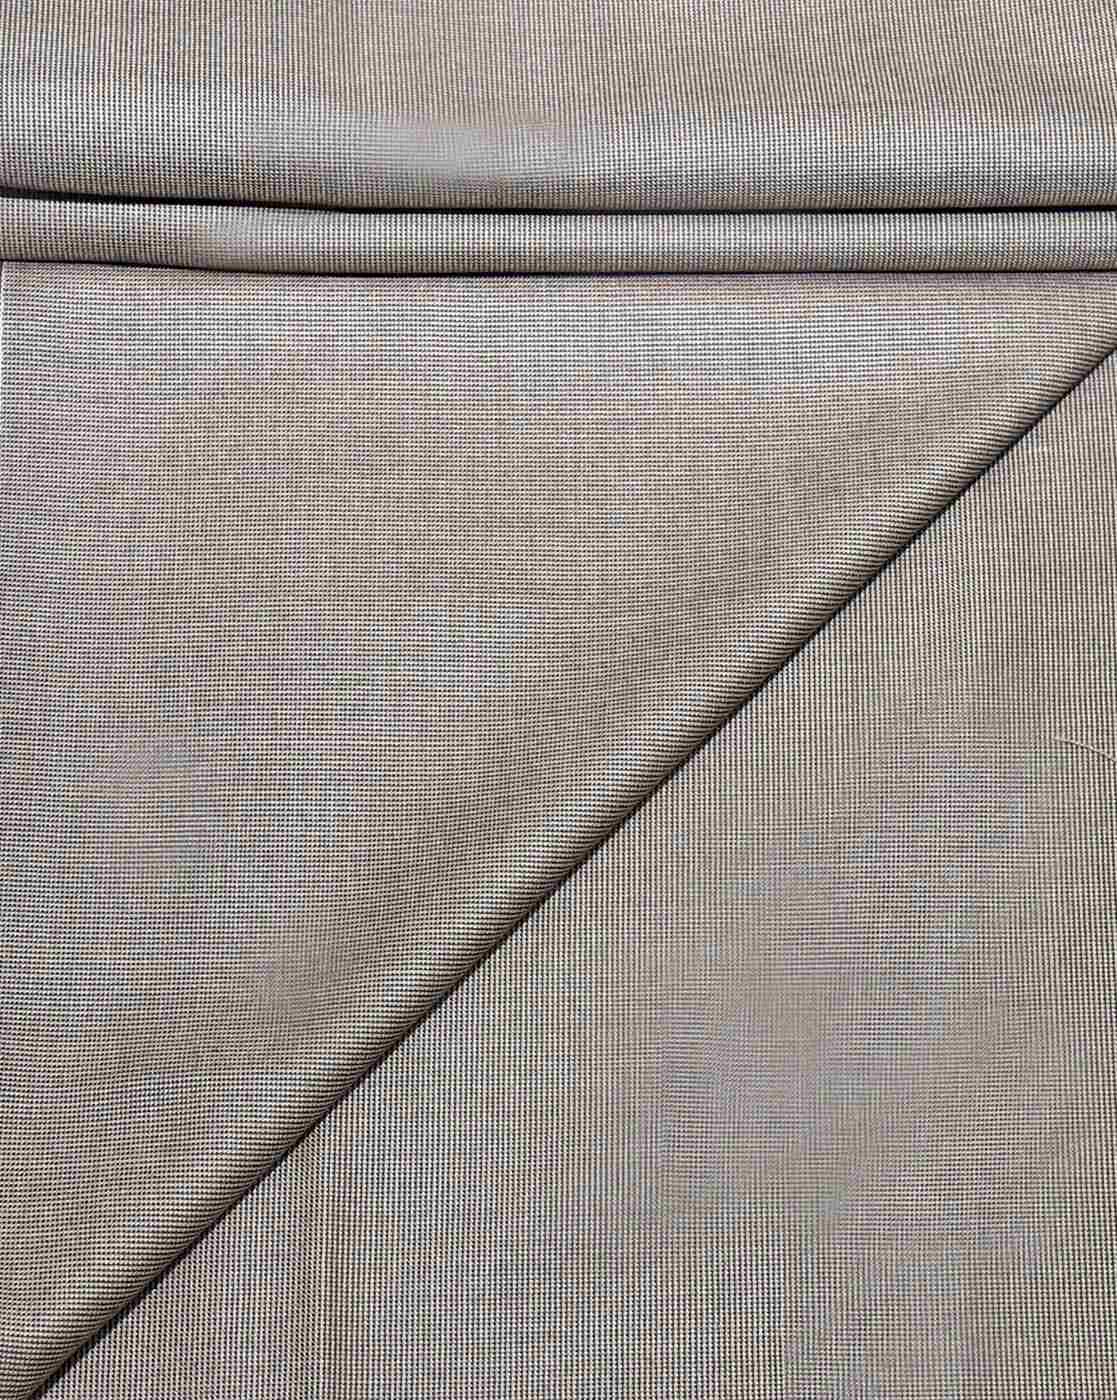 Cotton Pant Fabric  Buy Cotton Pant Fabric Online Starting at Just 211   Meesho